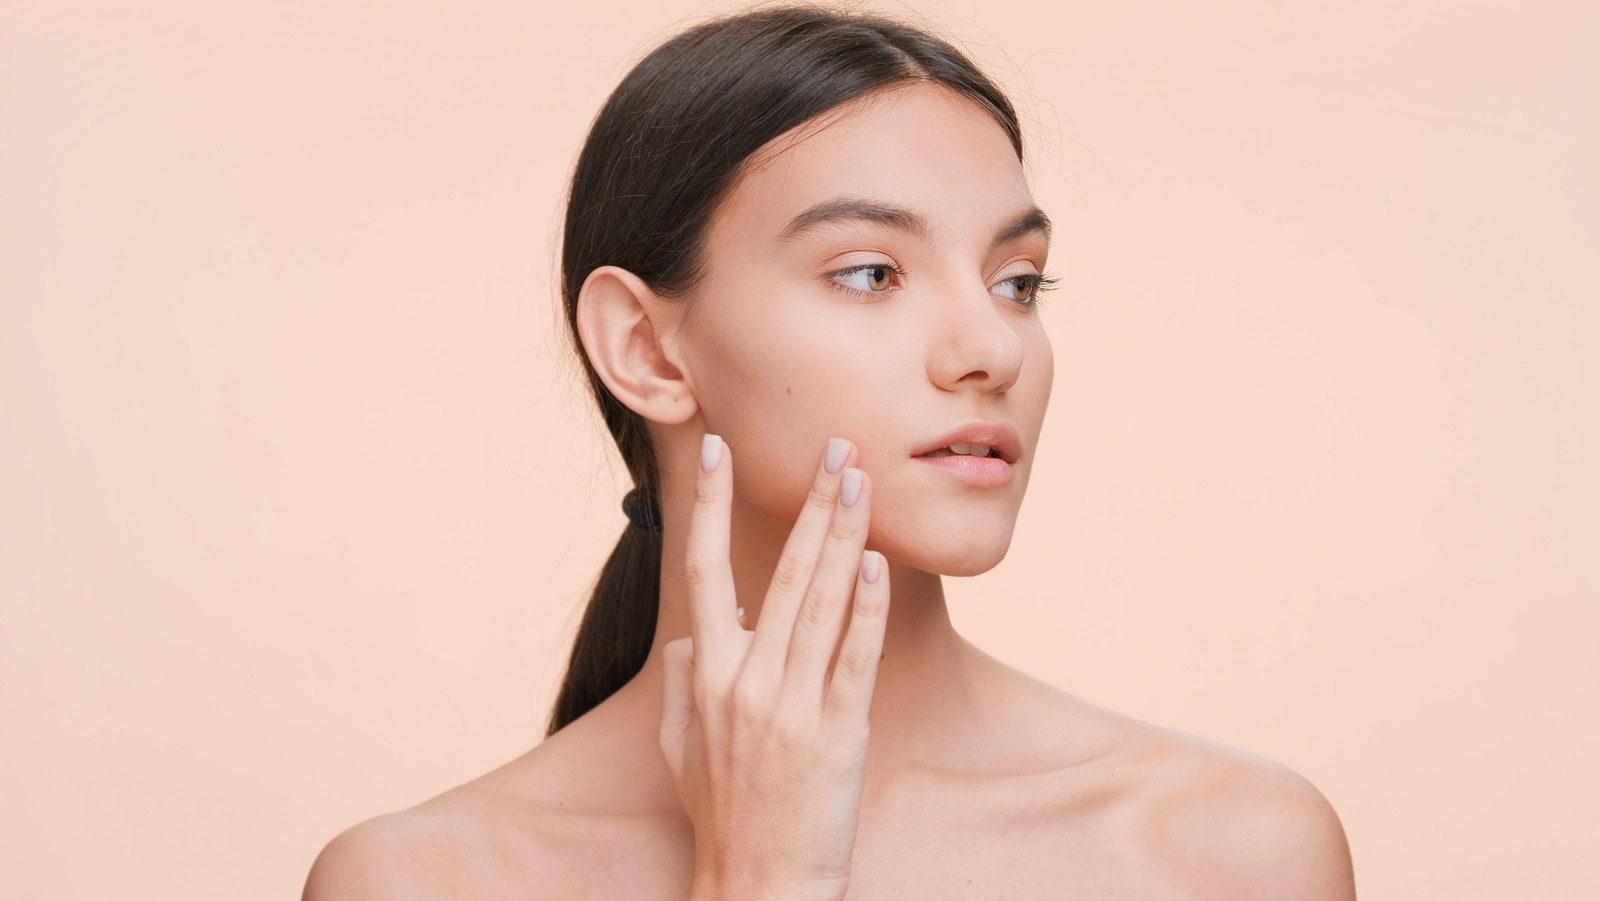 What is mewing? Why the TikTok beauty trend is controversial